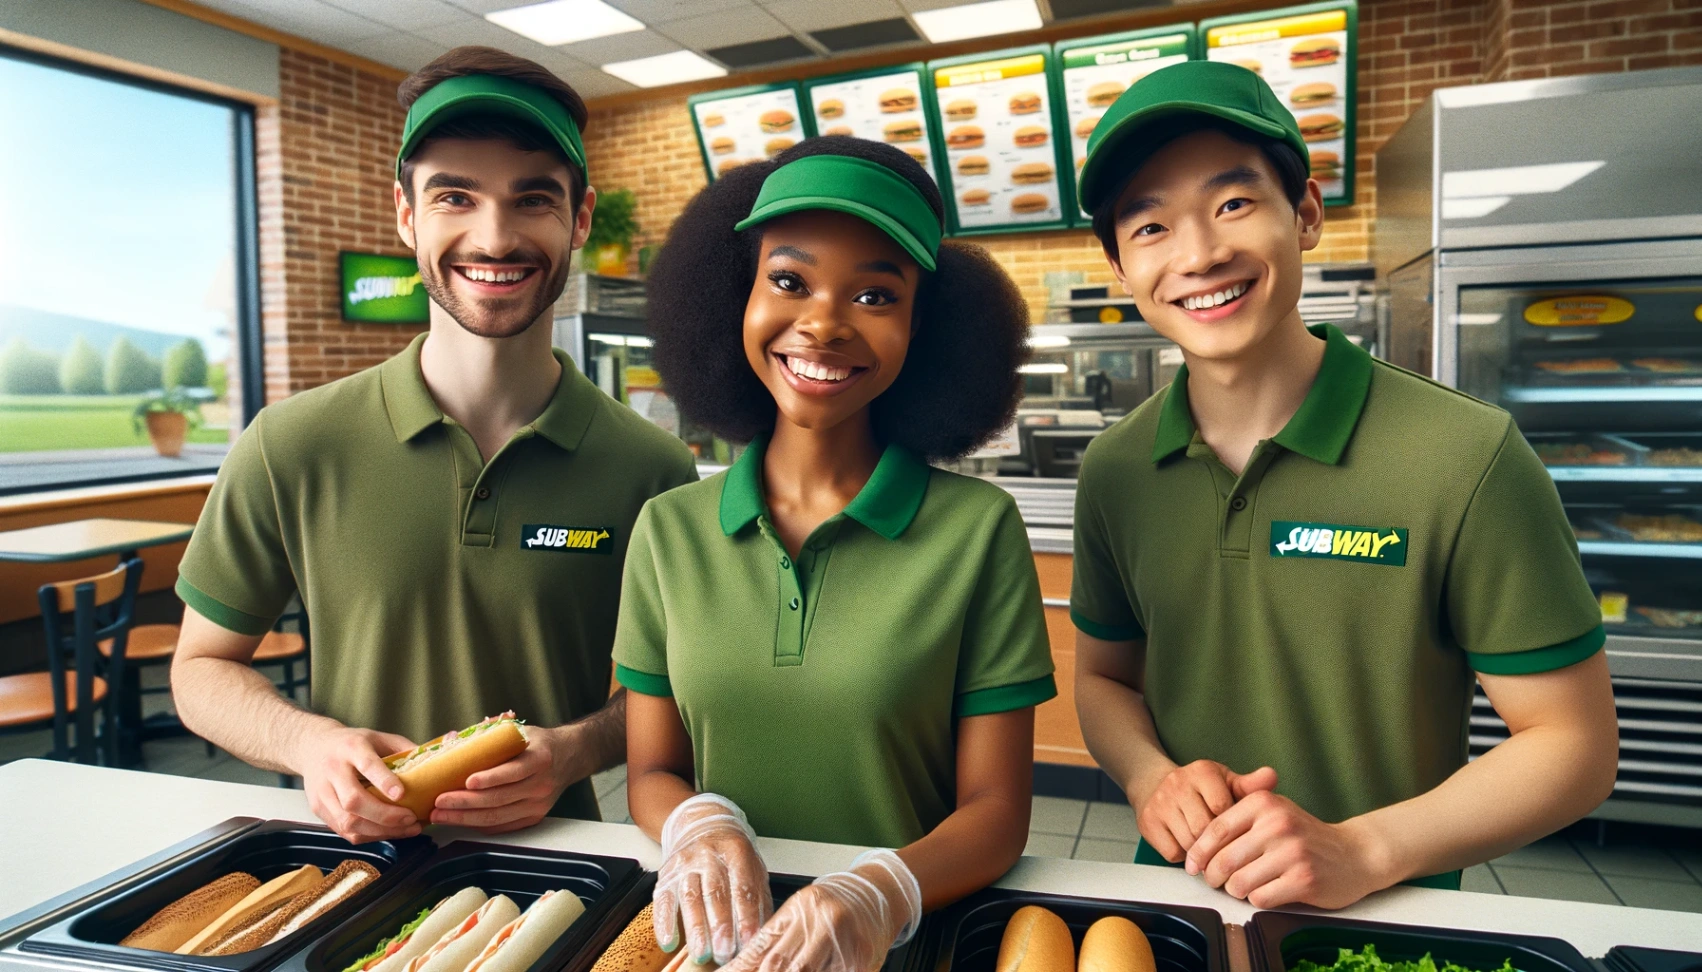 Join the Subway Team: Easy Application Process Explained